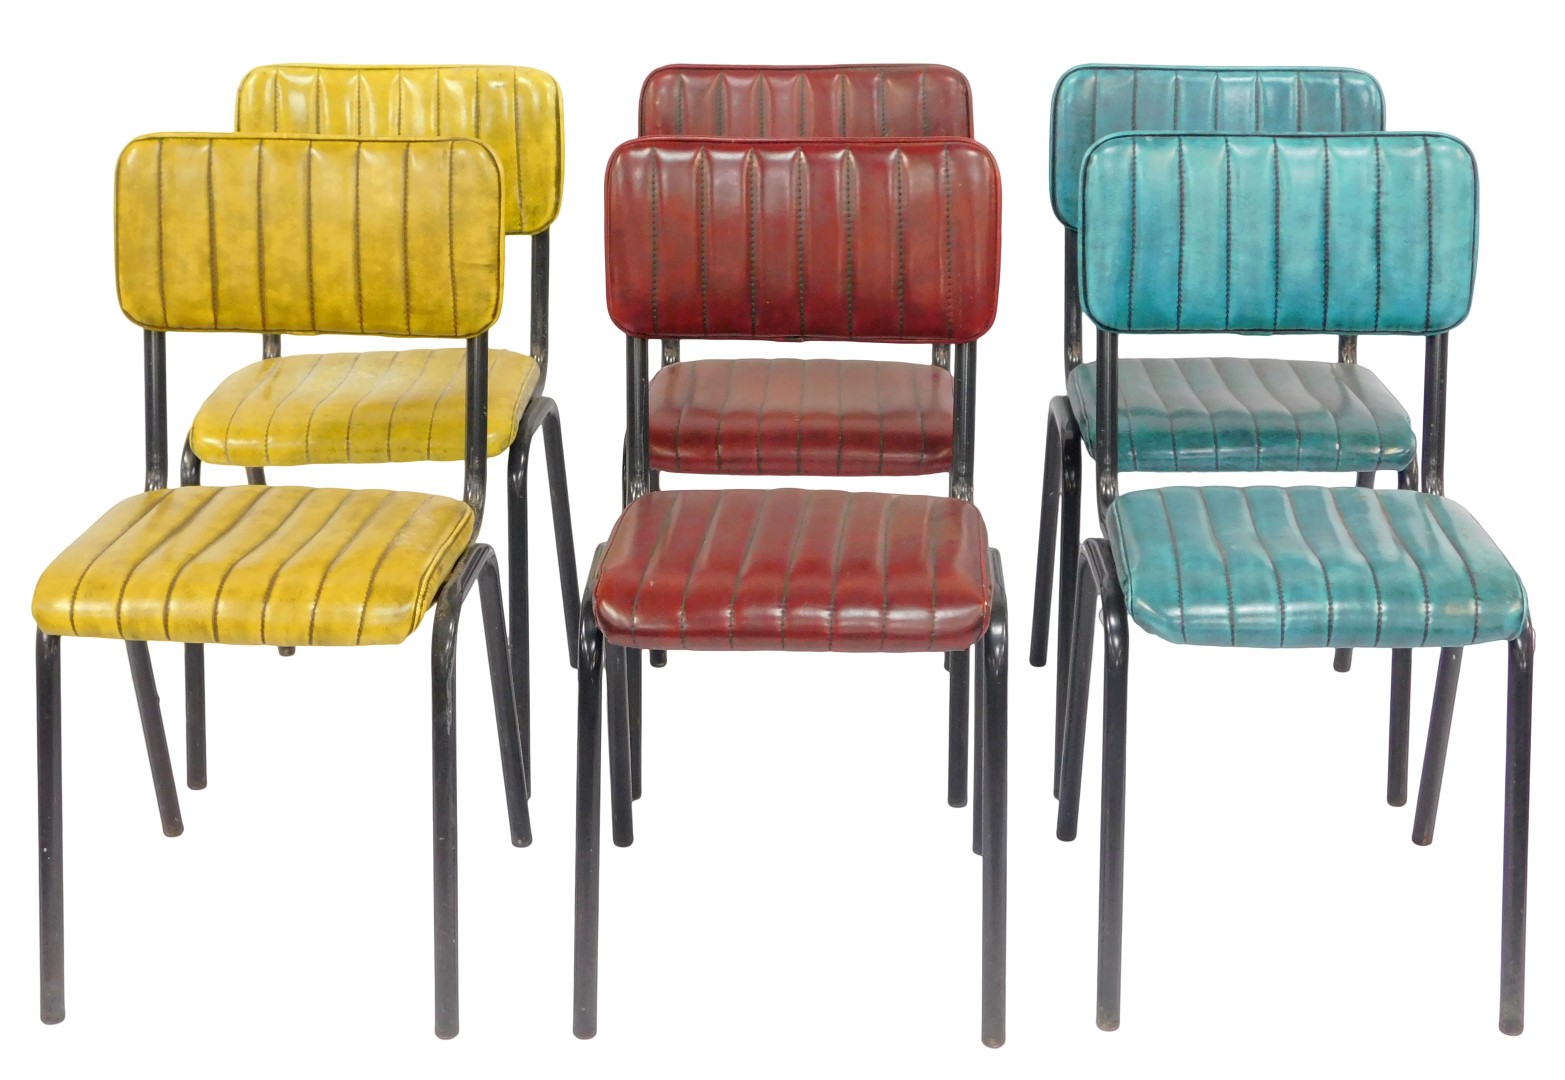 A set of six retro style dining chairs, each with a leatherette upholstered seat and back, in